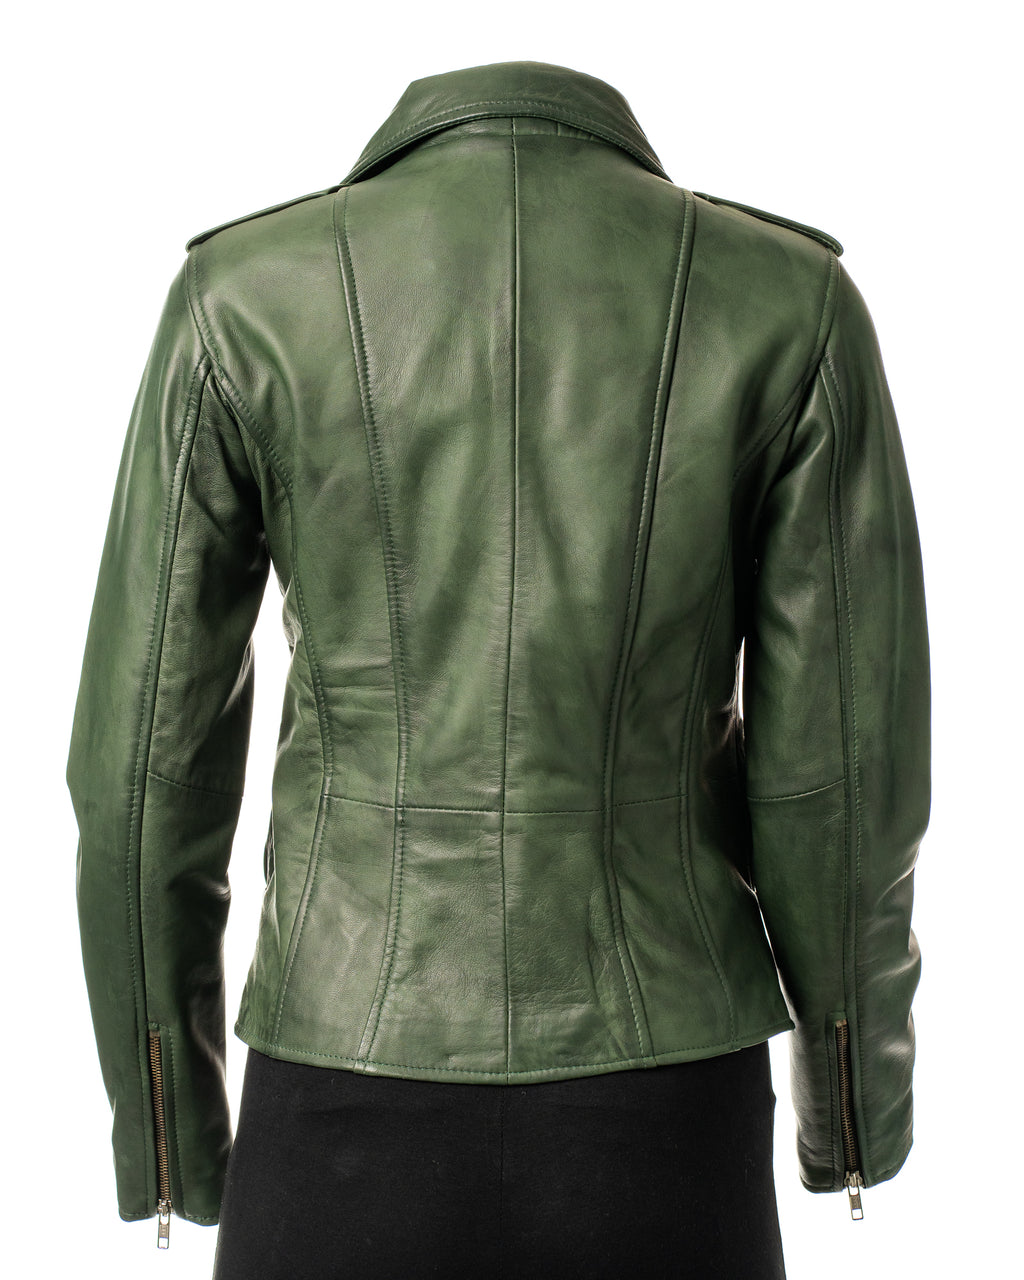 Ladies Forest Green Buckled Asymmetric Biker Style Leather Jacket: Angelica